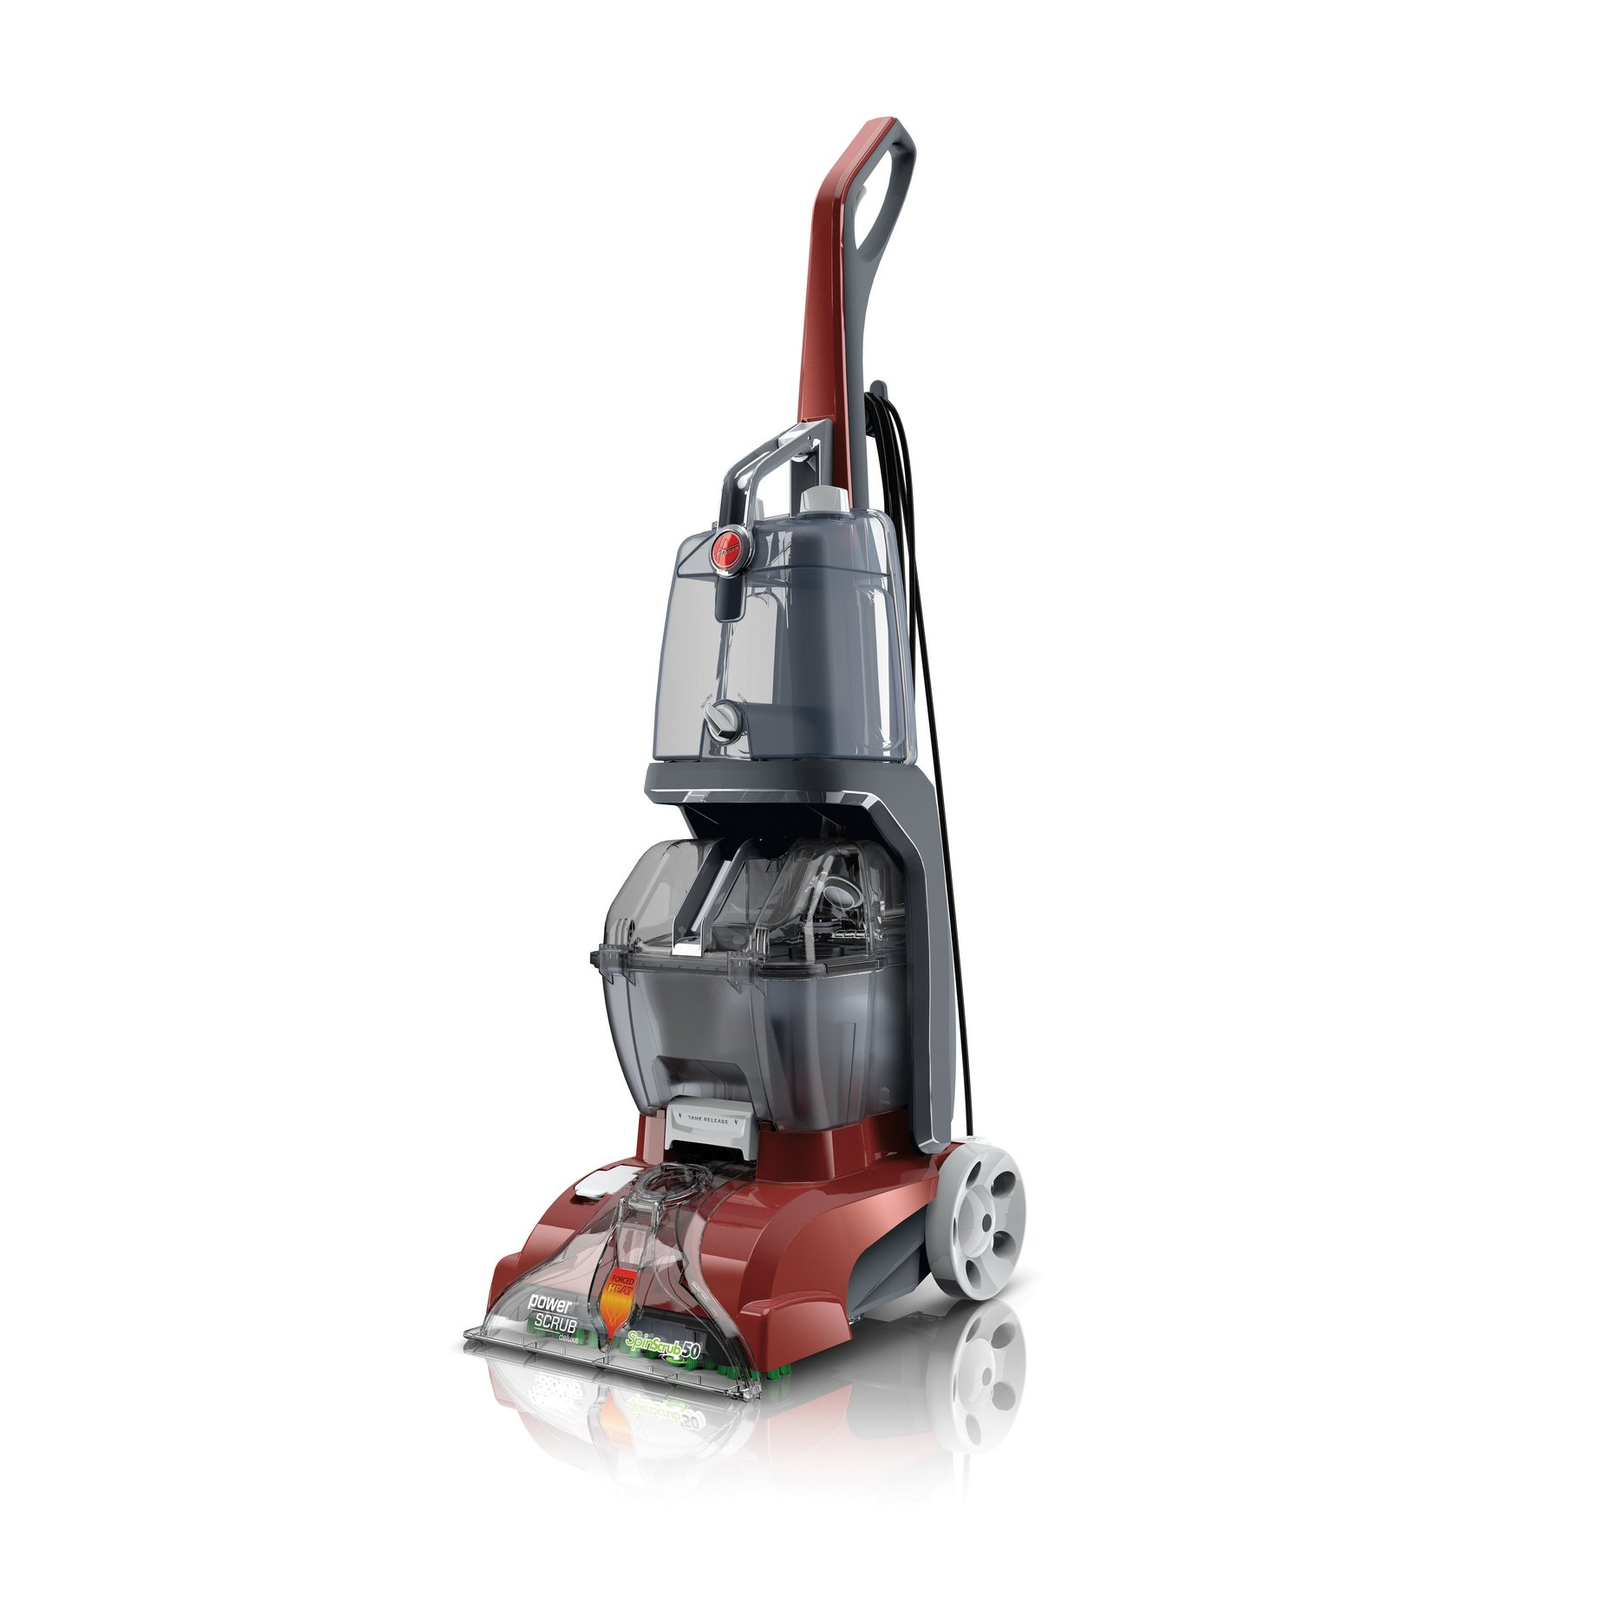 Hoover Power Scrub Deluxe Carpet Cleaner Your Vacuum Superstore